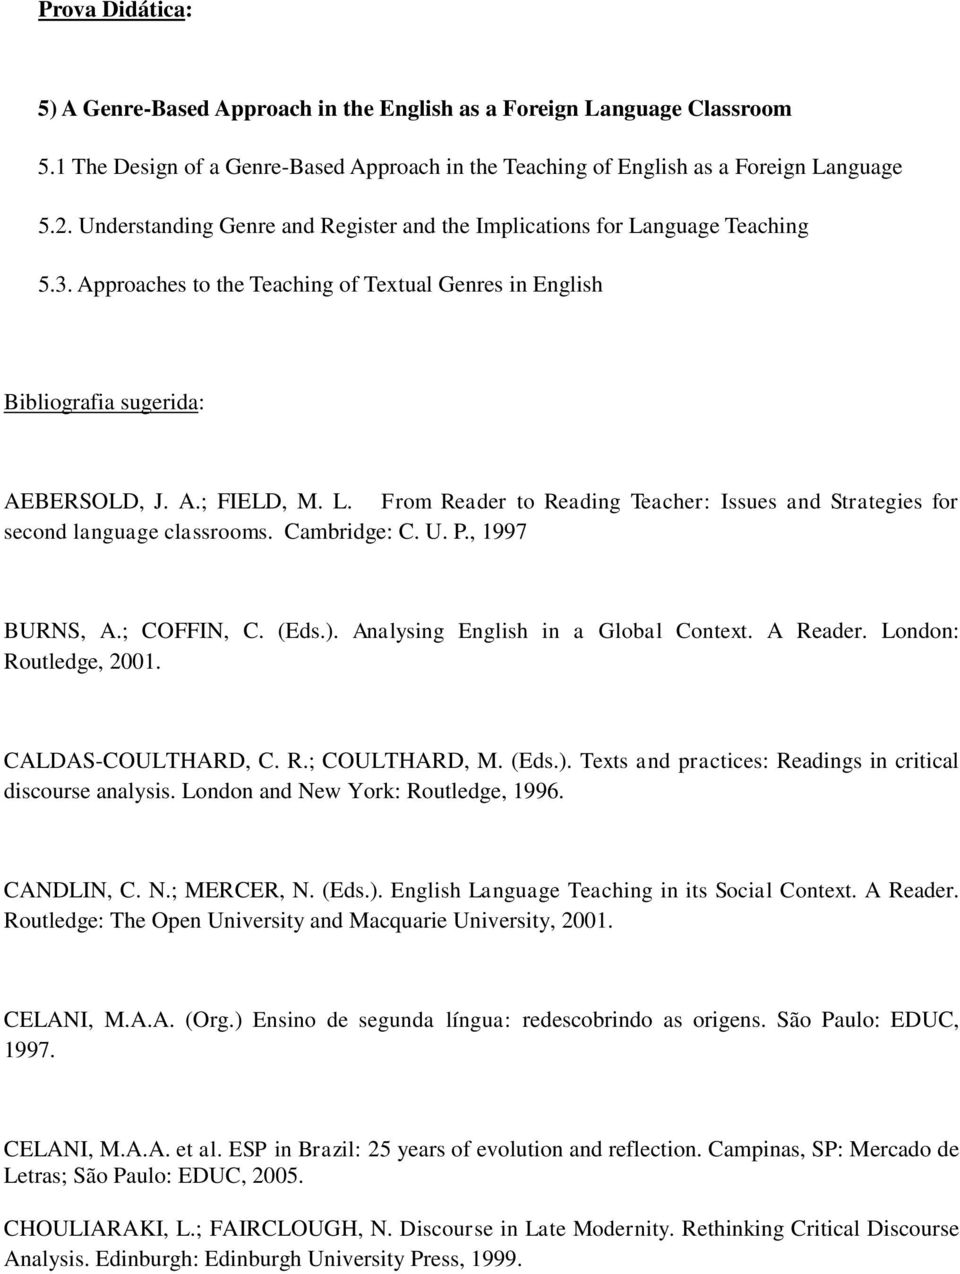 Cambridge: C. U. P., 1997 BURNS, A.; COFFIN, C. (Eds.). Analysing English in a Global Context. A Reader. London: Routledge, 2001. CALDAS-COULTHARD, C. R.; COULTHARD, M. (Eds.). Texts and practices: Readings in critical discourse analysis.